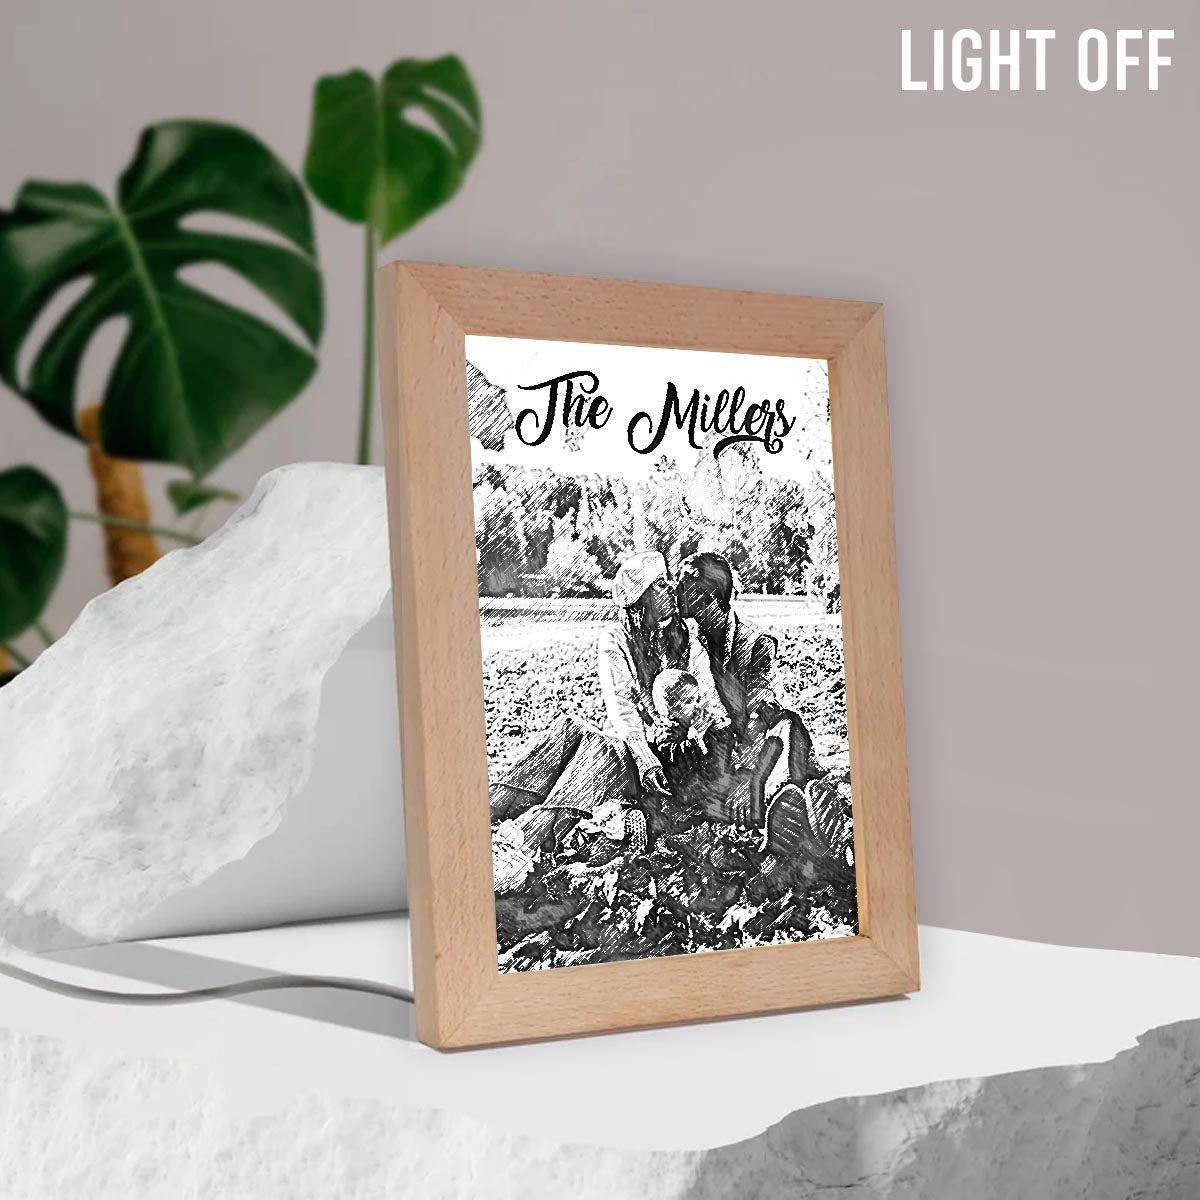 Love Family - Personalized Family Light Photo Frame